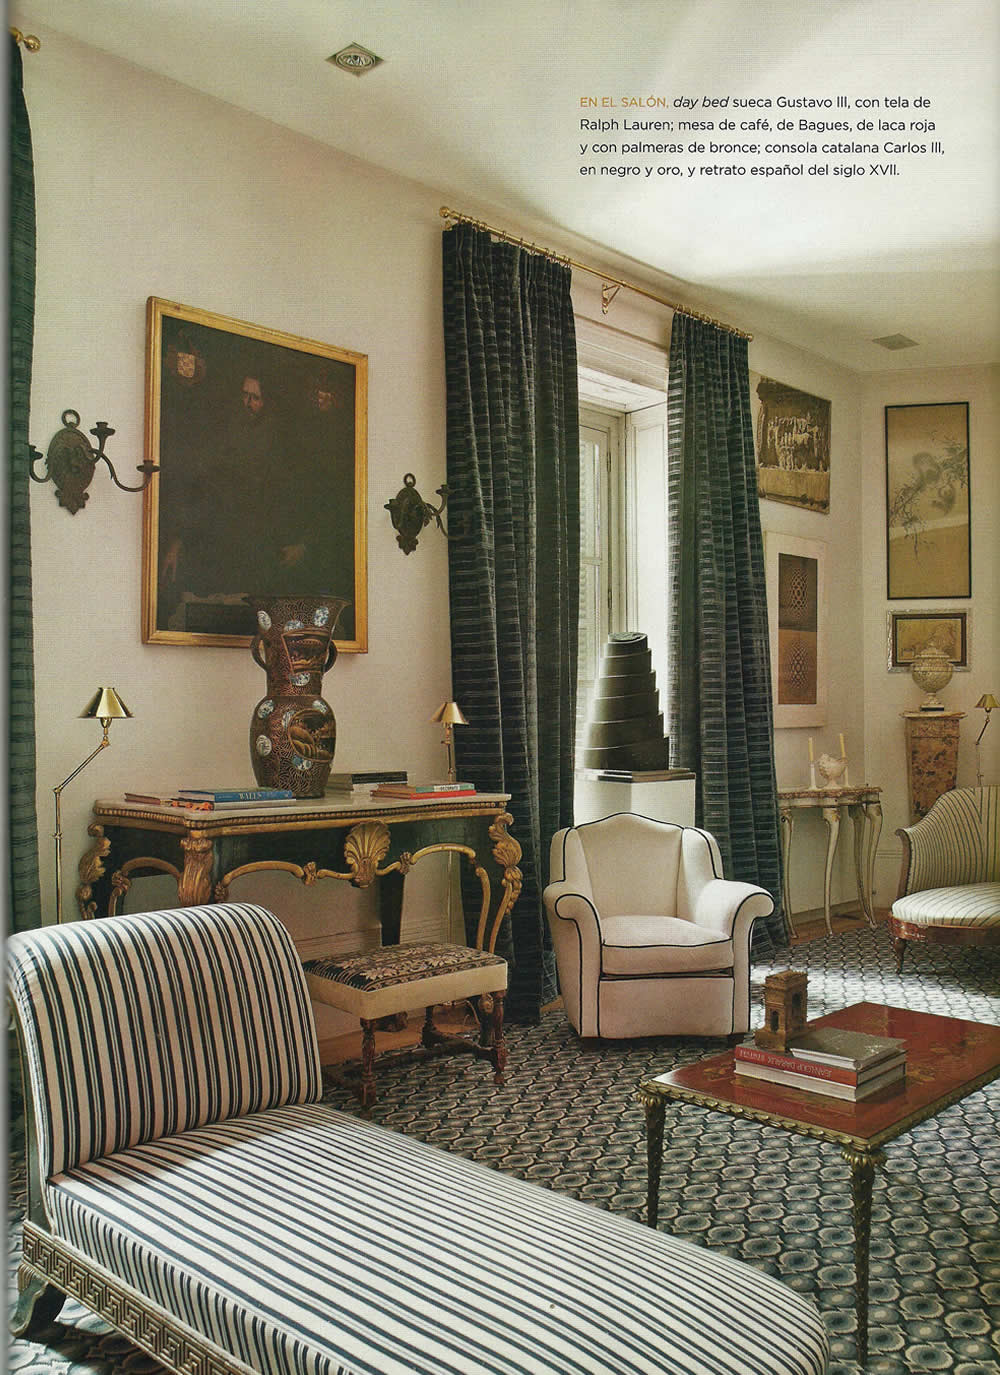 And again, from the same article, an alternate view showing a Greek revival style chaise longue.